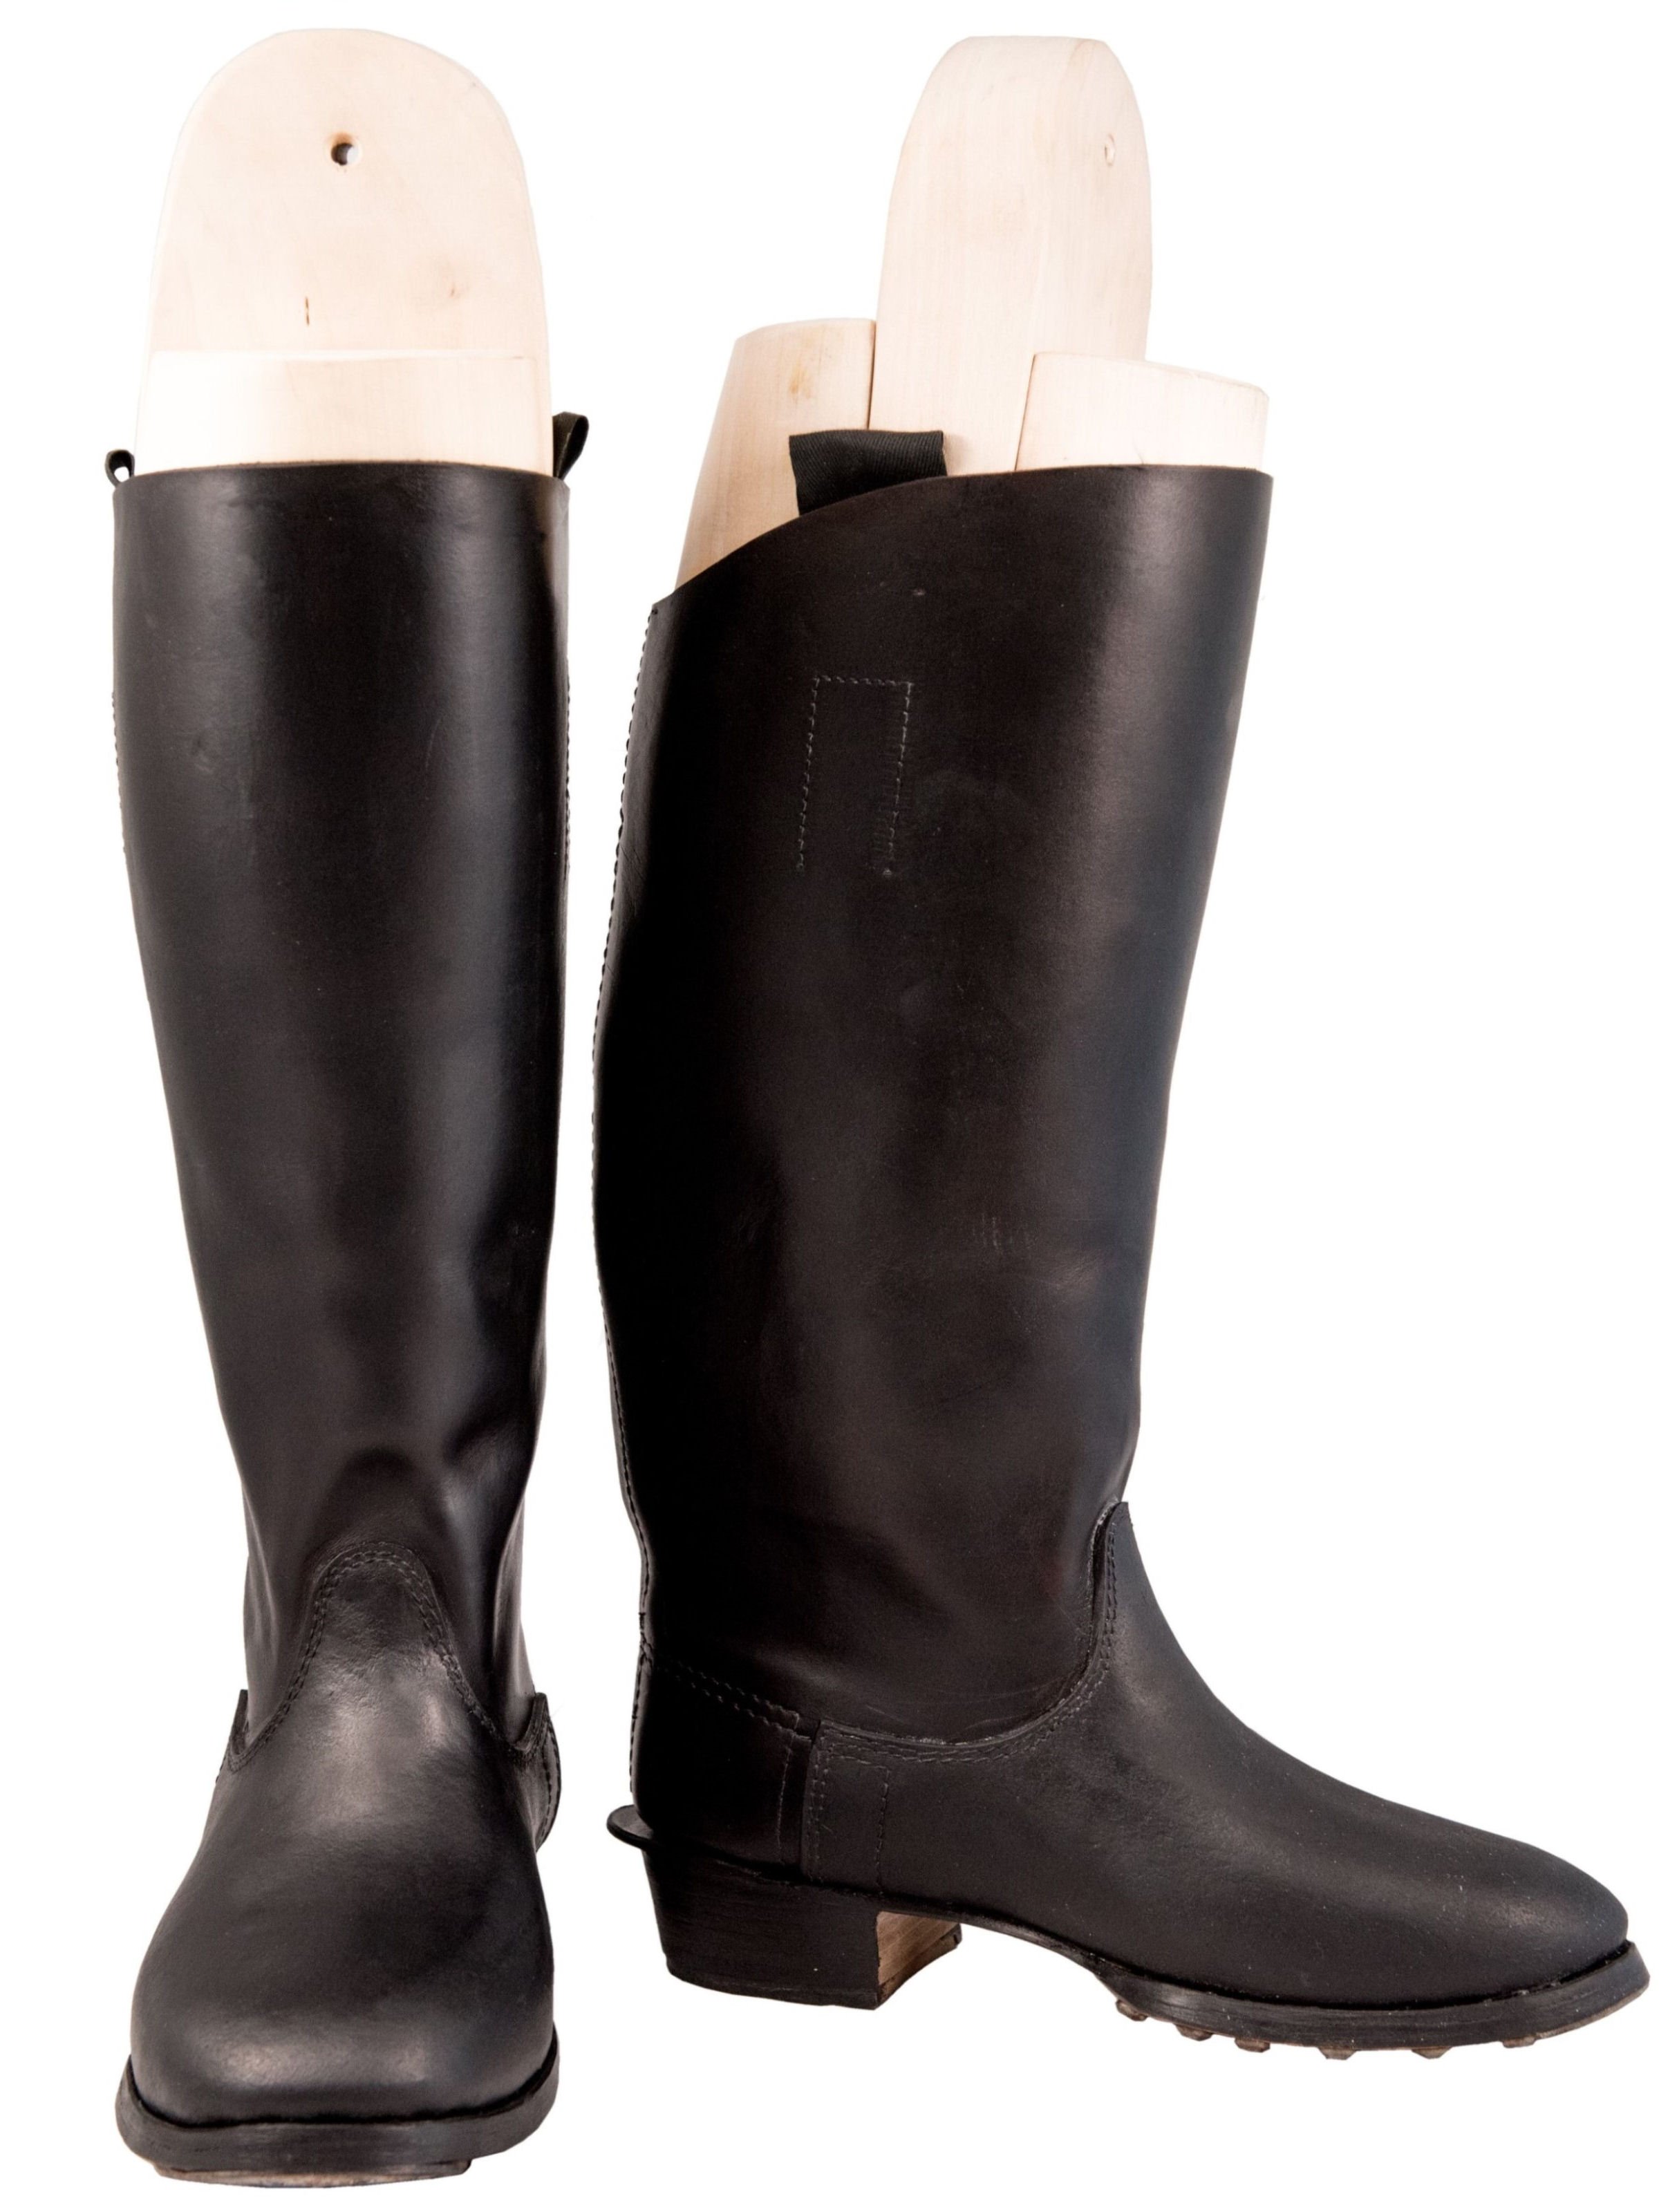 WH/SS Reiterstiefle - German riding boots - repro 312,25 € | Nestof.pl